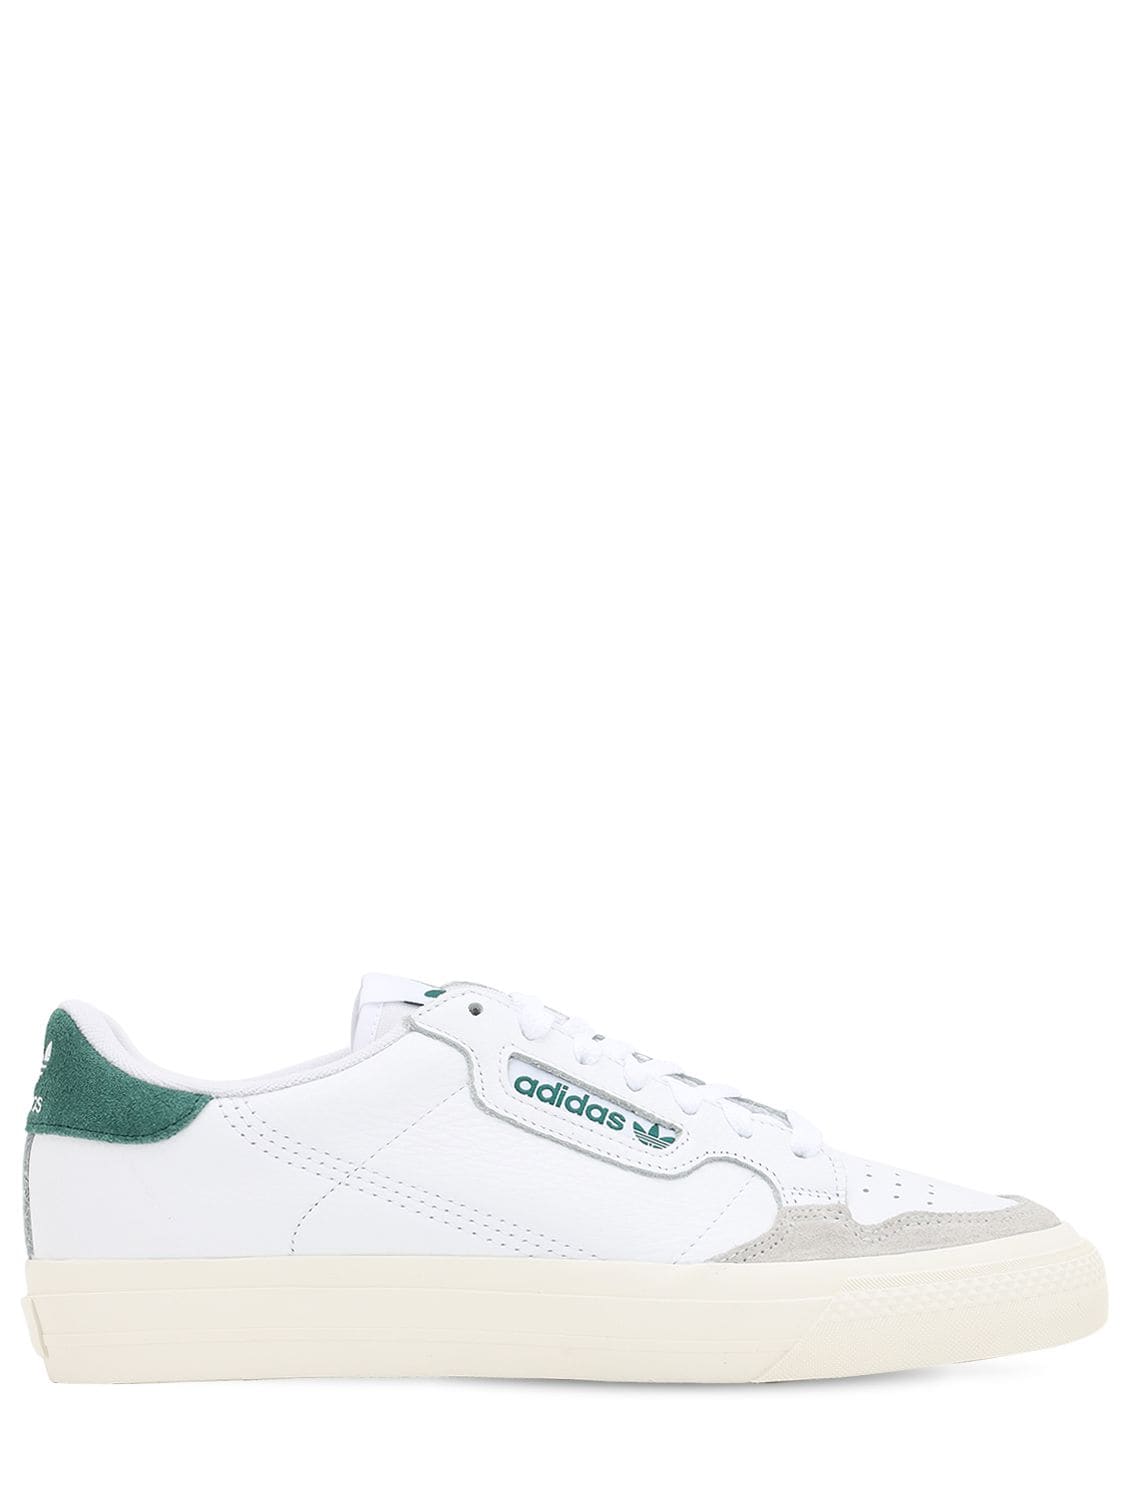 Originals Continental 80 Sneakers In Leather With Green Tab-white | ModeSens